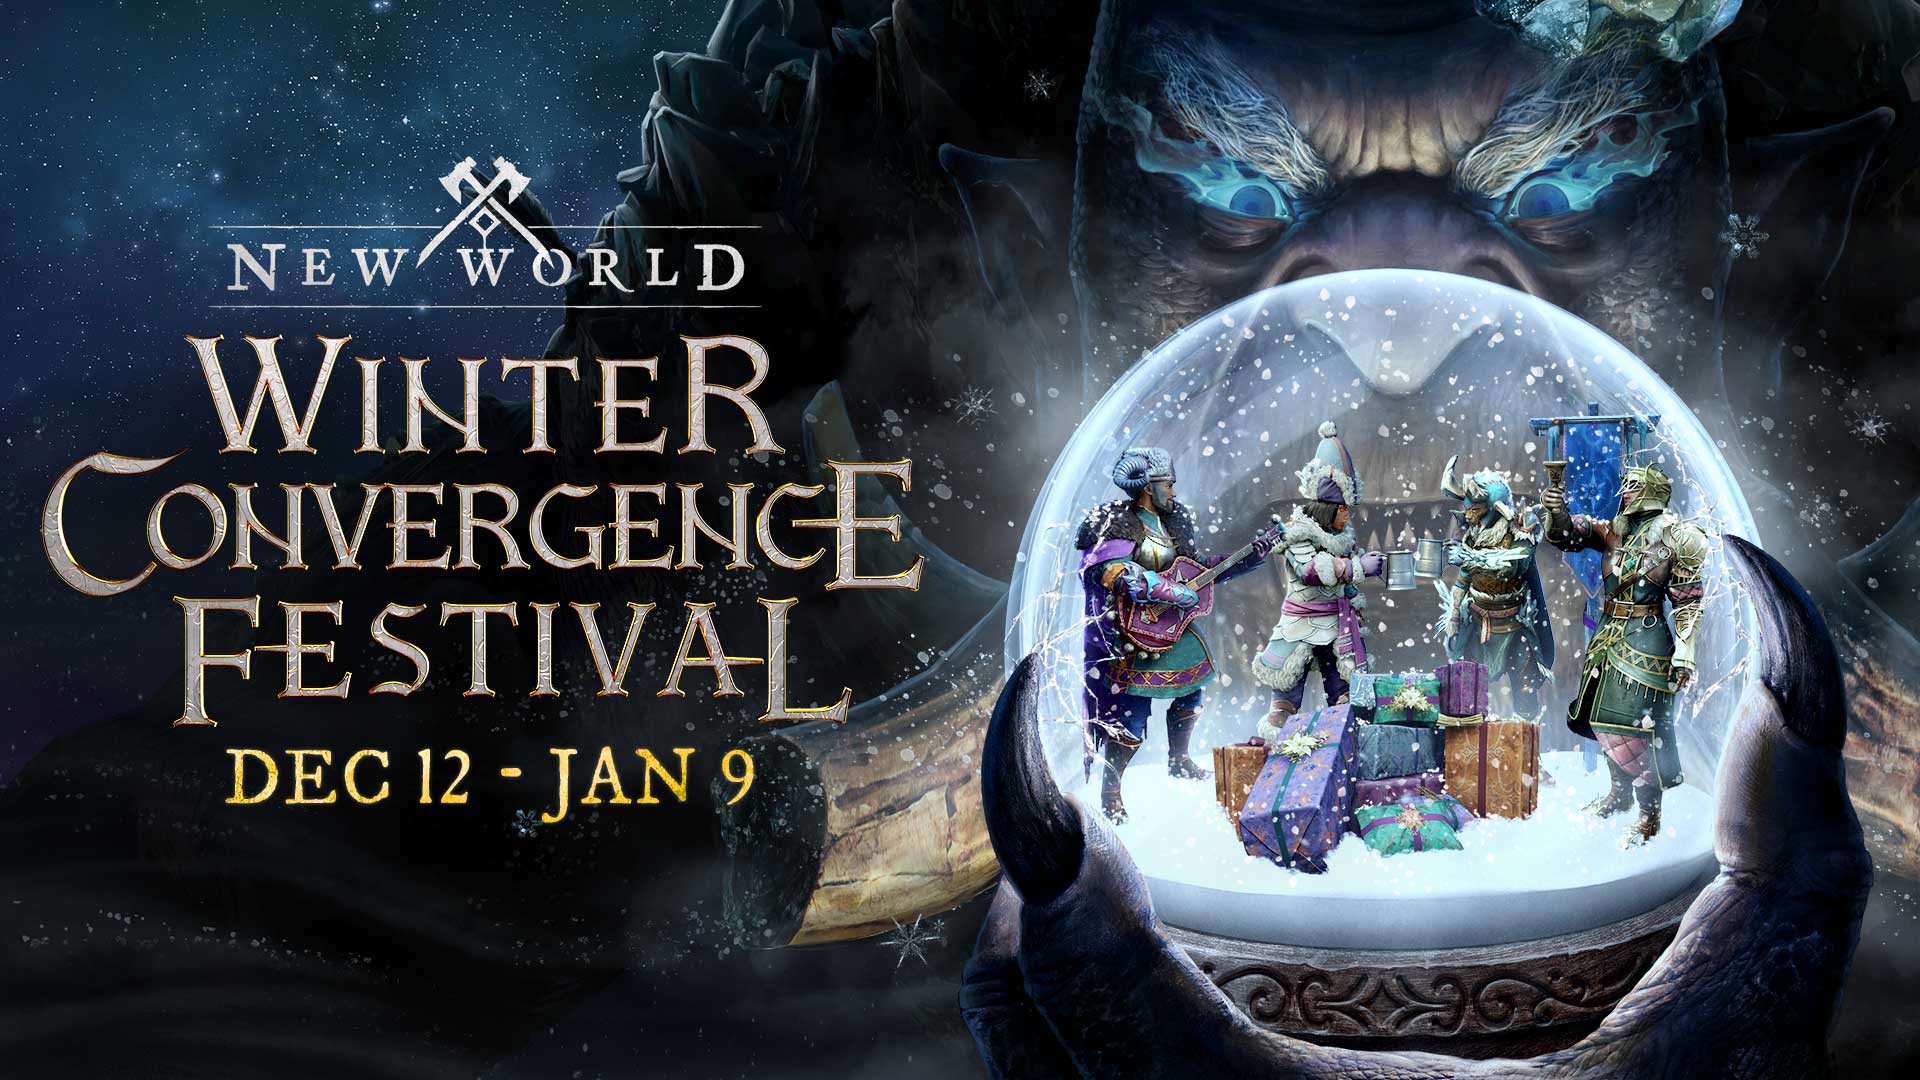 Eternal Frost Announcement - News  New World - Open World MMO PC Game